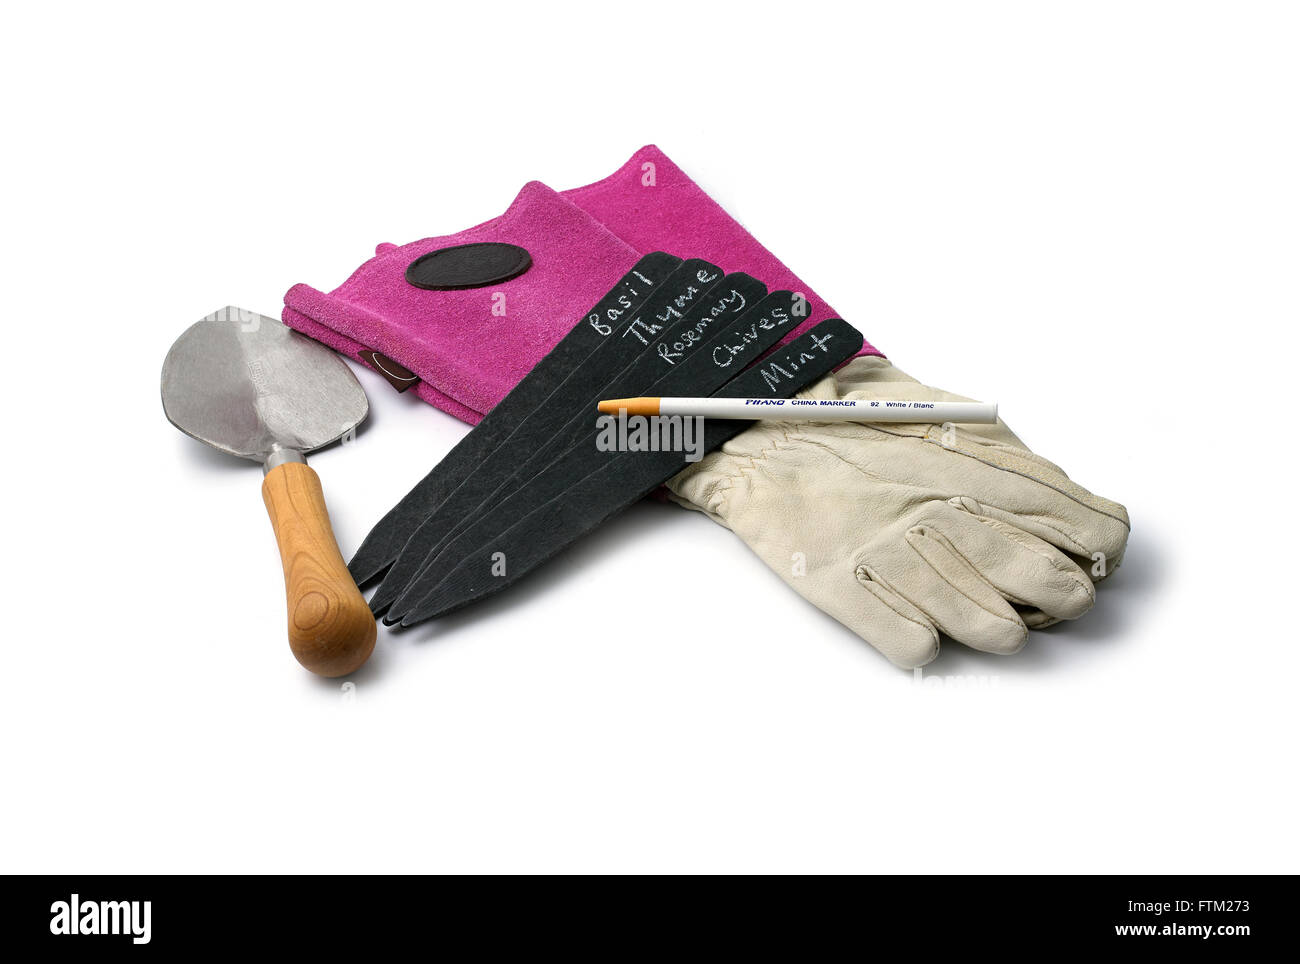 Gardening gloves, tags, pencil and trowel Stock Photo